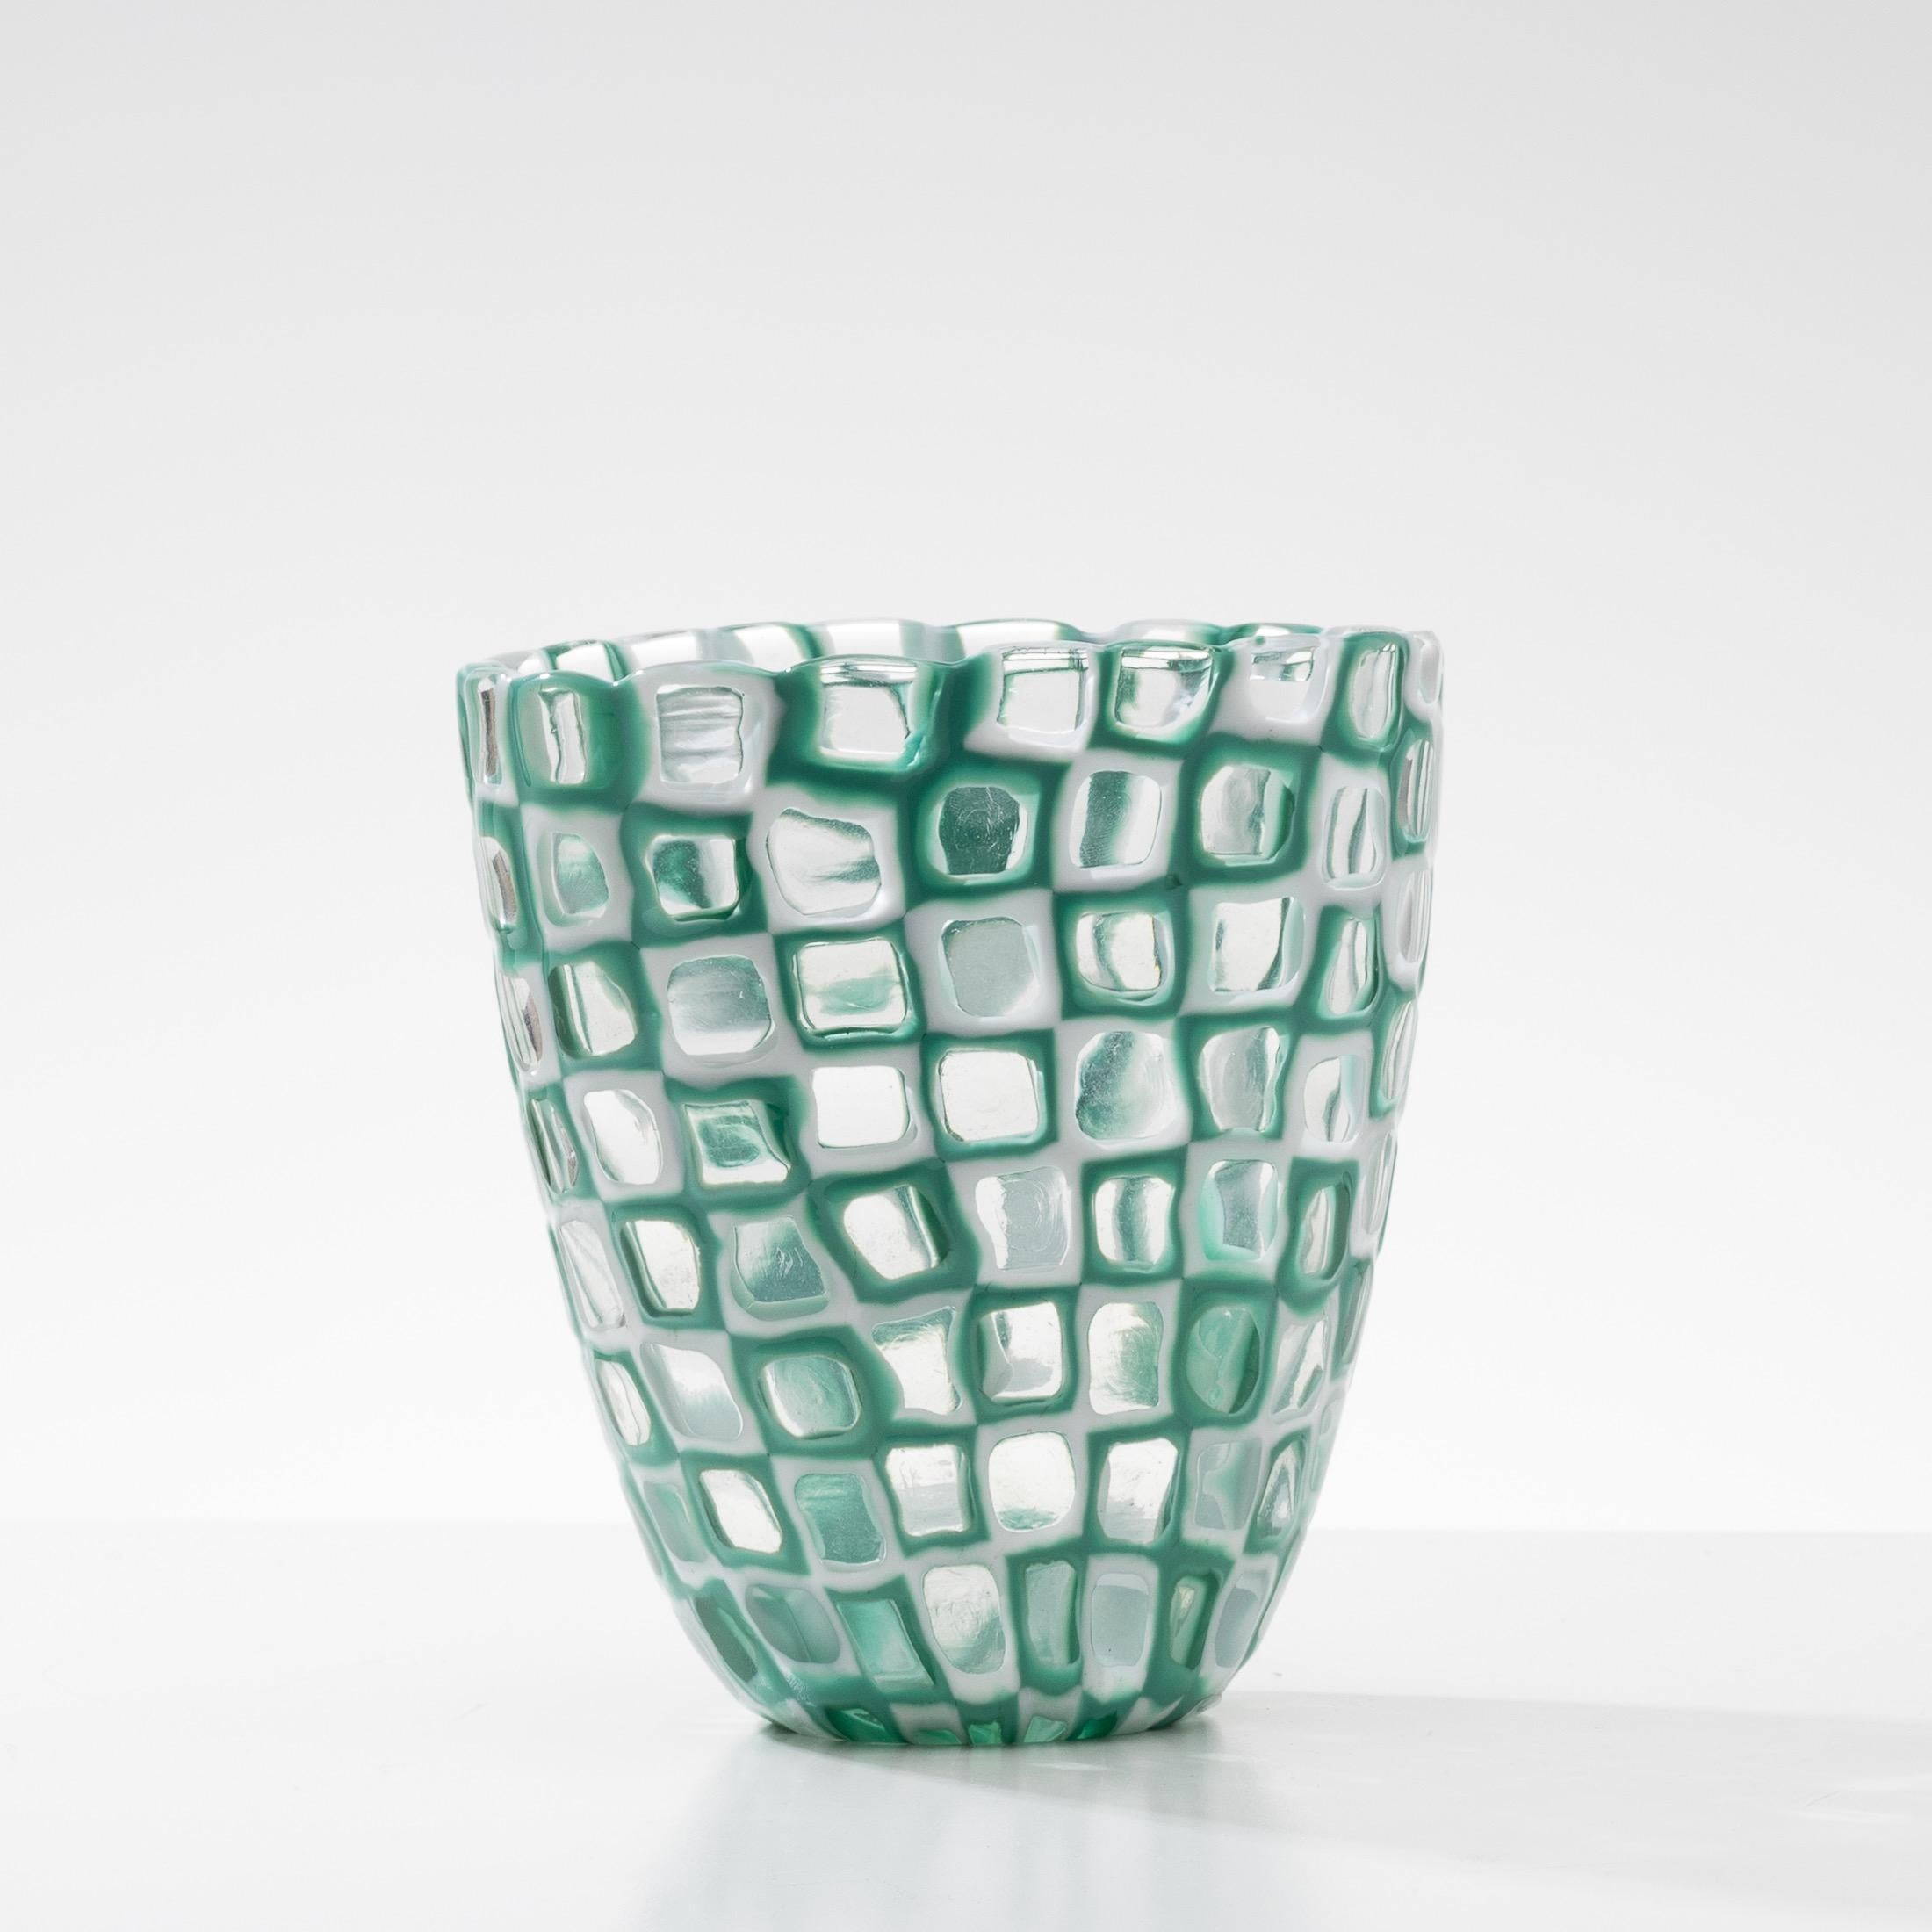 Occhi vase (model referenced under number 8524)
Occhi vase of oval shape on the top.
Composed of an arrangement of latimo glass murrines in the center of clear glass and green and clear glass murrines.
 